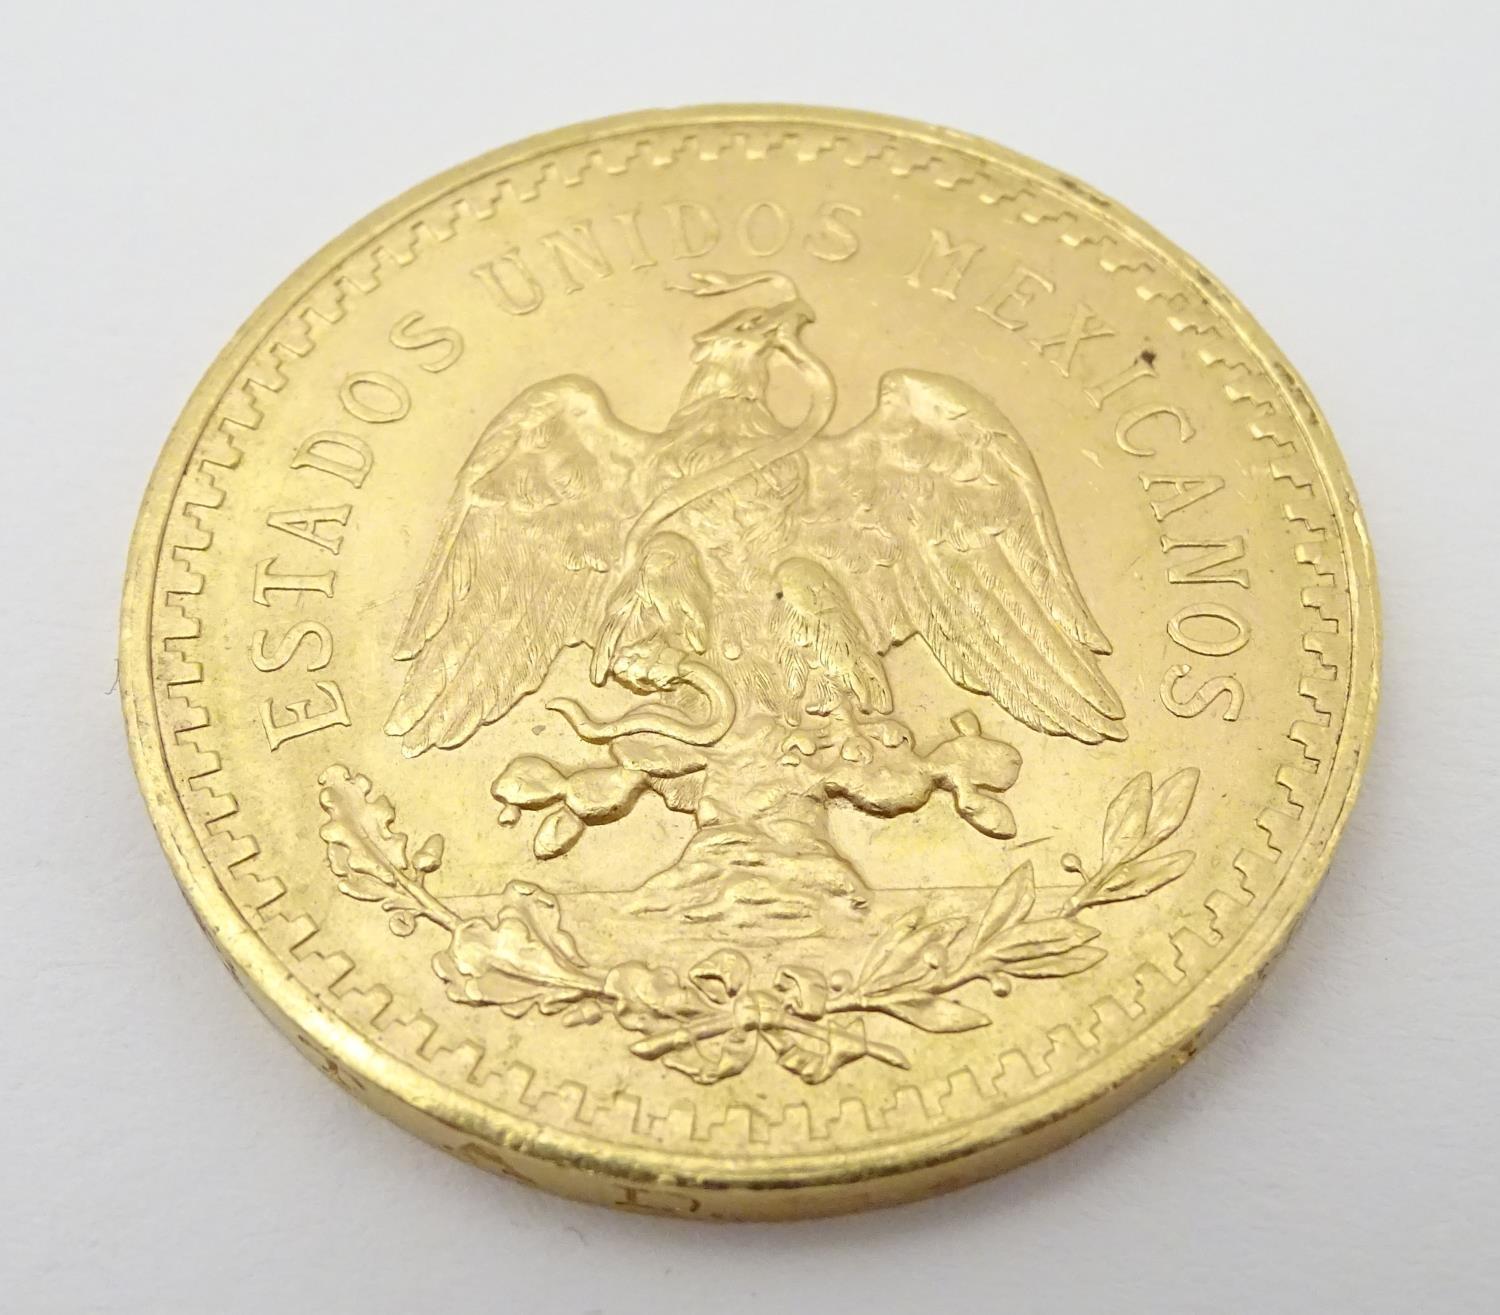 A 1943 gold 50 pesos coin commemorating Mexico's 100th anniversary of independence from Spain. The - Image 5 of 10